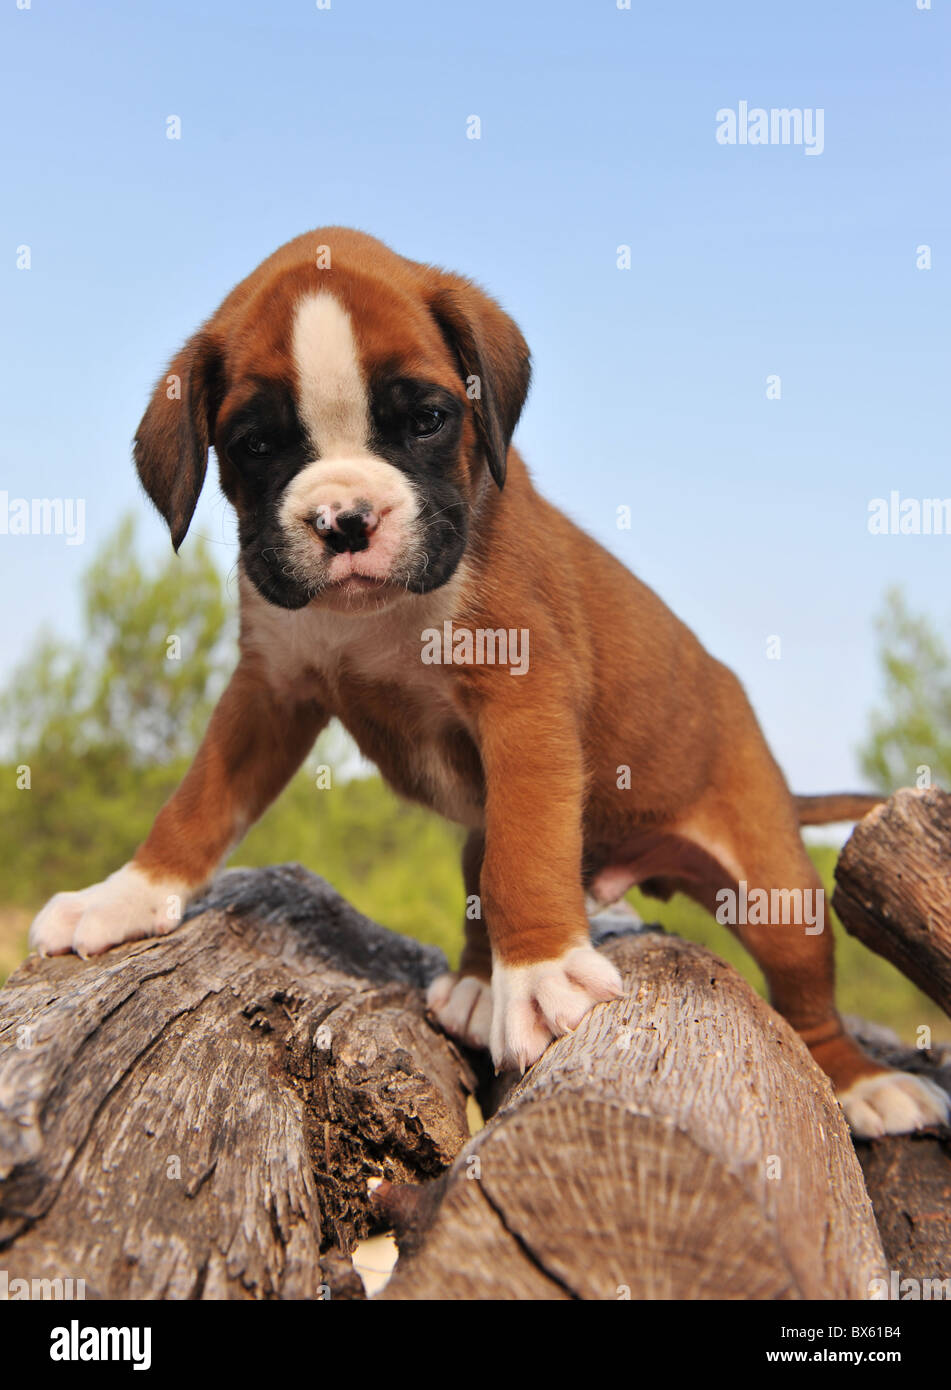 Boxer Dog Puppy High Resolution Stock Photography and Images - Alamy